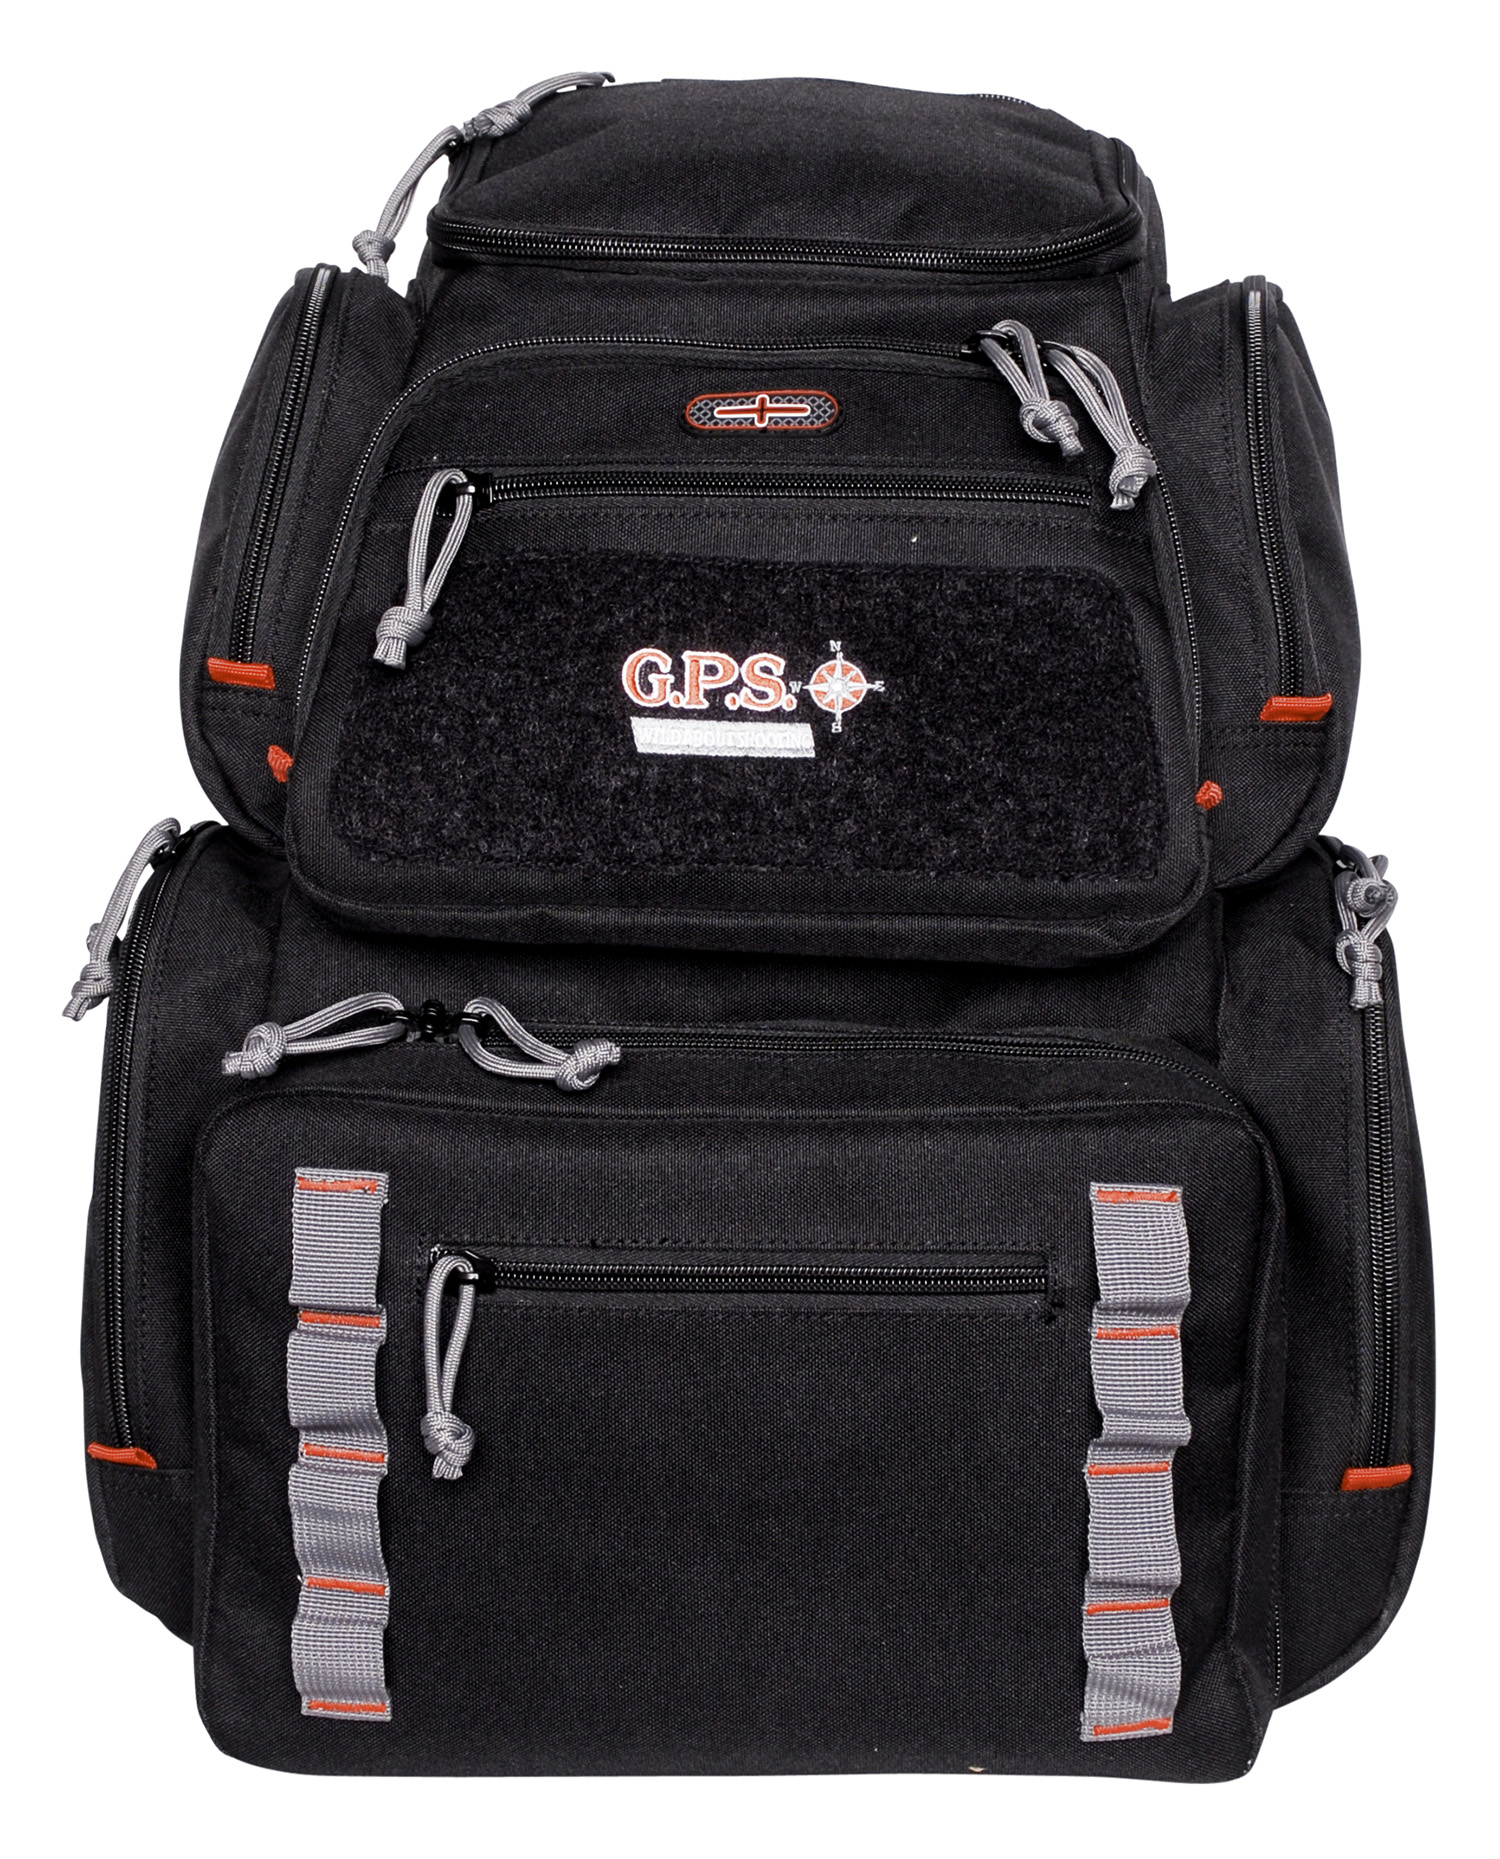 GPS Bags GPS1712BPB Pistolero Backpack Black with Gray Accents, 5 Handgun Storage Cases, Accessory Pockets, Visual ID Storage System, Waterproof Pullout Cover, Internal Frame & MOLLE Webbing System